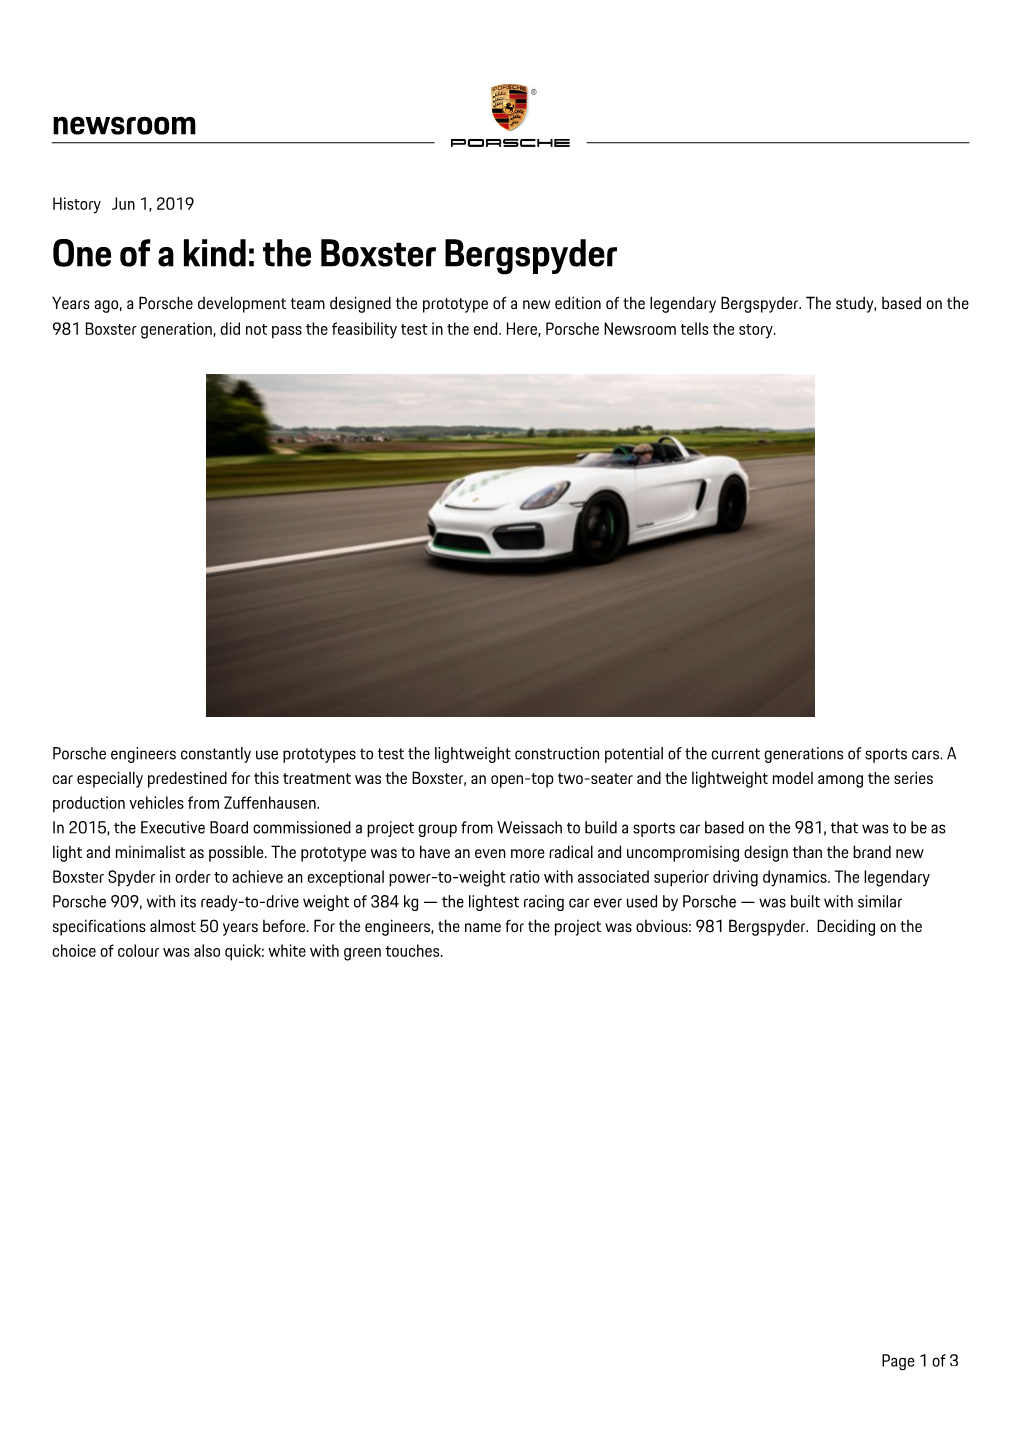 One of a Kind: the Boxster Bergspyder Years Ago, a Porsche Development Team Designed the Prototype of a New Edition of the Legendary Bergspyder